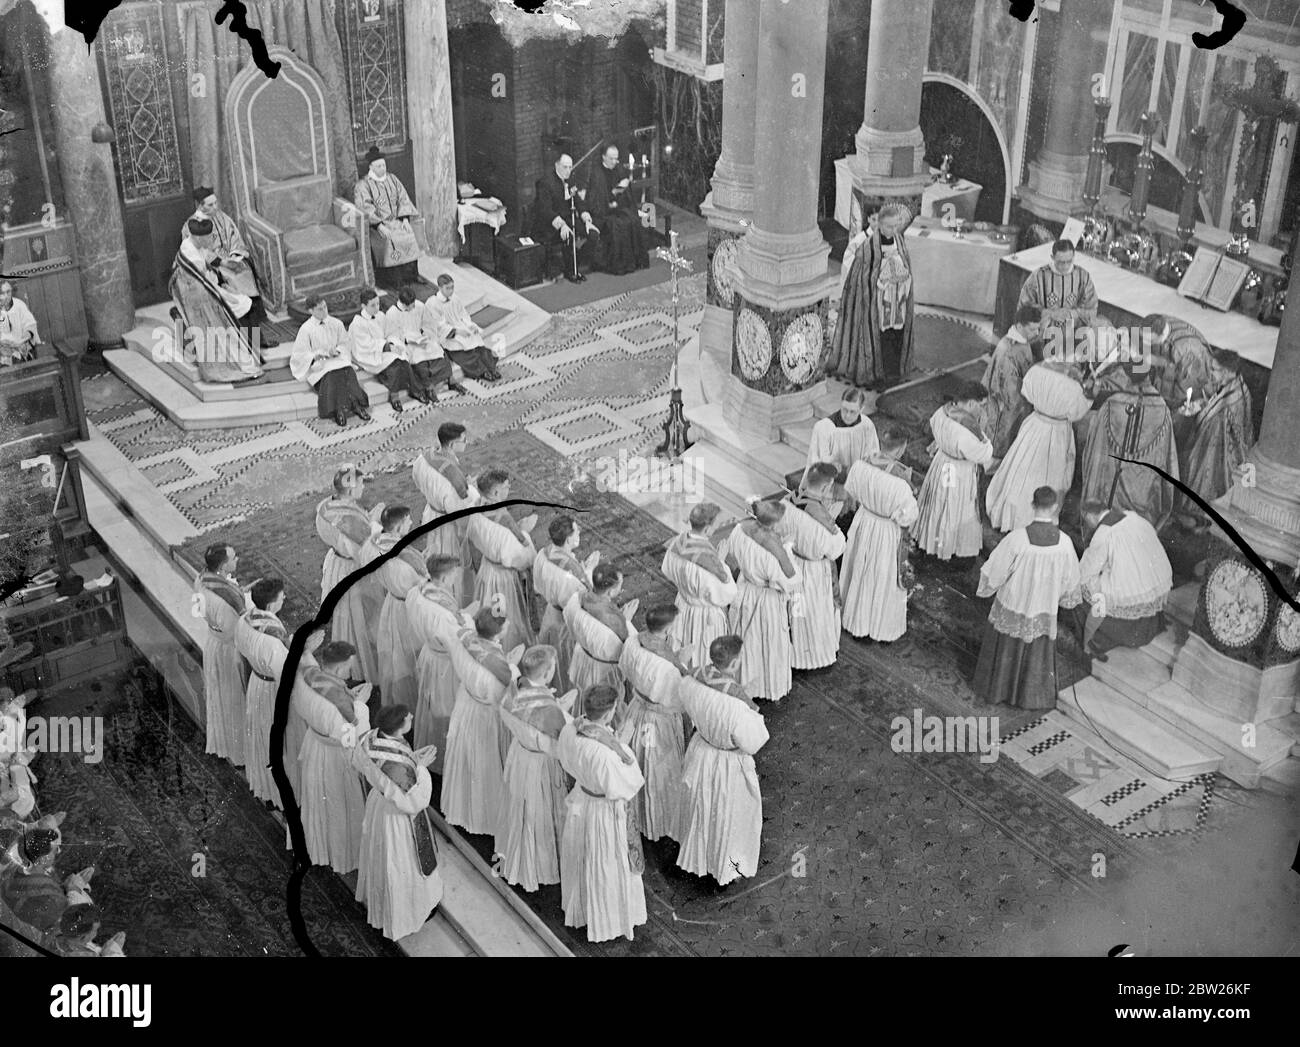 45 young priests ordained as missionaries at Westminster Cathedral. Forty Five young Roman catholic priests who are to go all parts of the world were ordained as missionaries by Cardinal Hinsley, Archbishop of Westminster, at Westminster cathedral. Photo shows, Cardinal hinsley anoiting the priests during the ceremony. 9 July 1938 Stock Photo